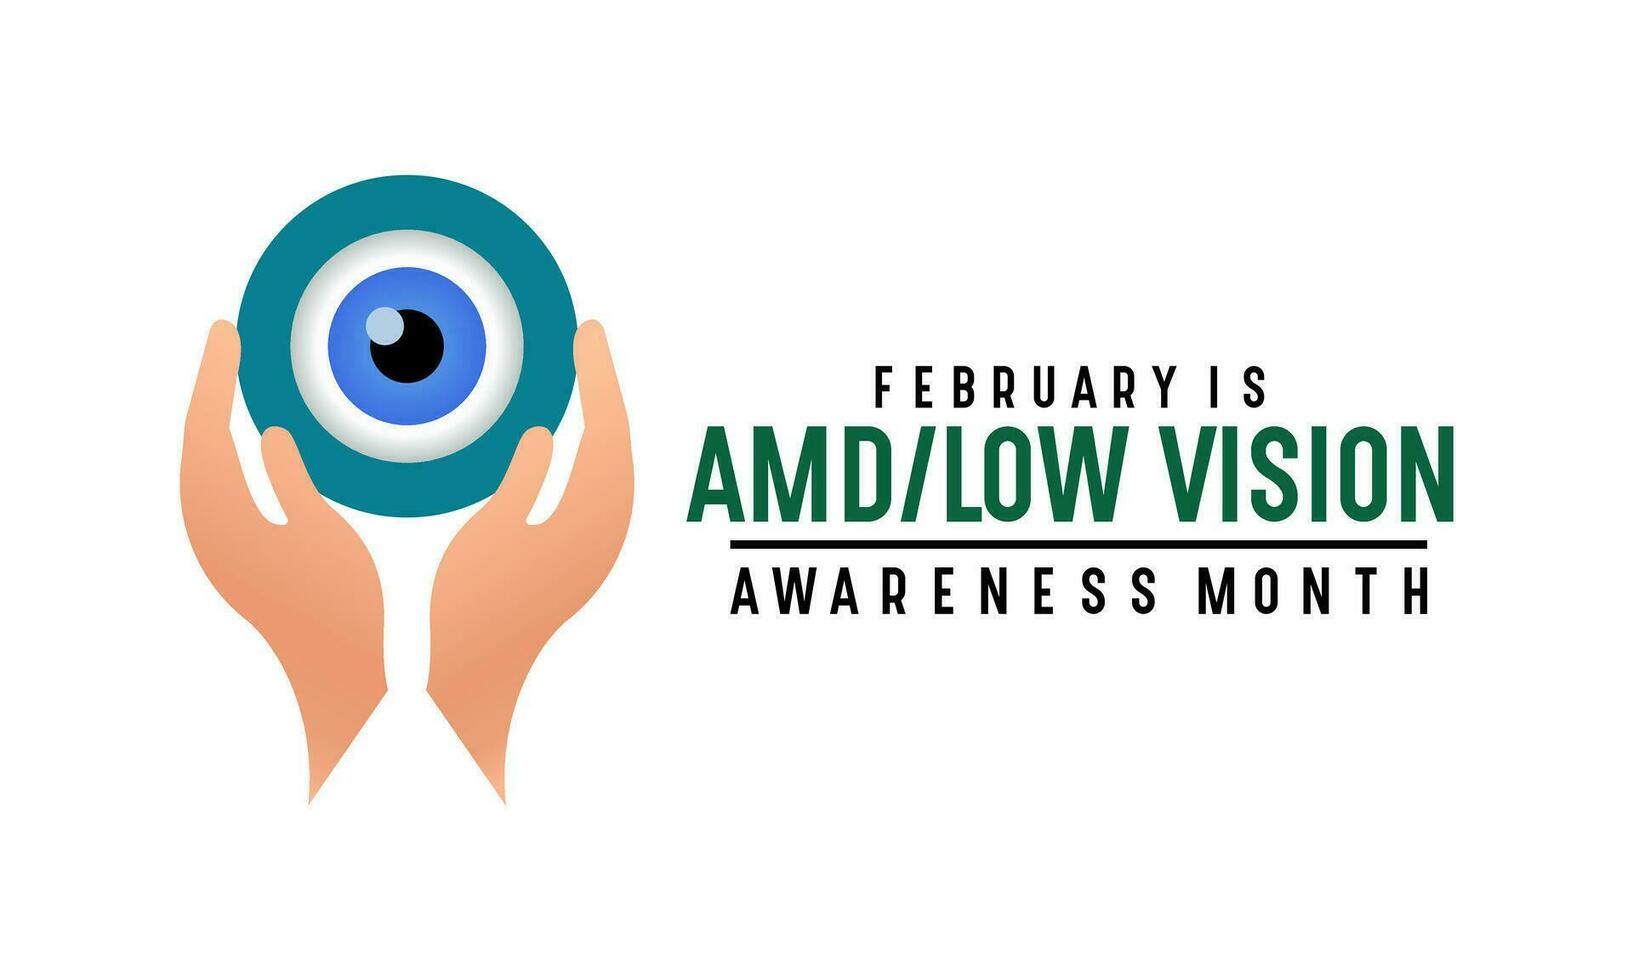 Amd low vision awareness month observed every year in month of February. Banner, poster, card template design. Health awareness. vector